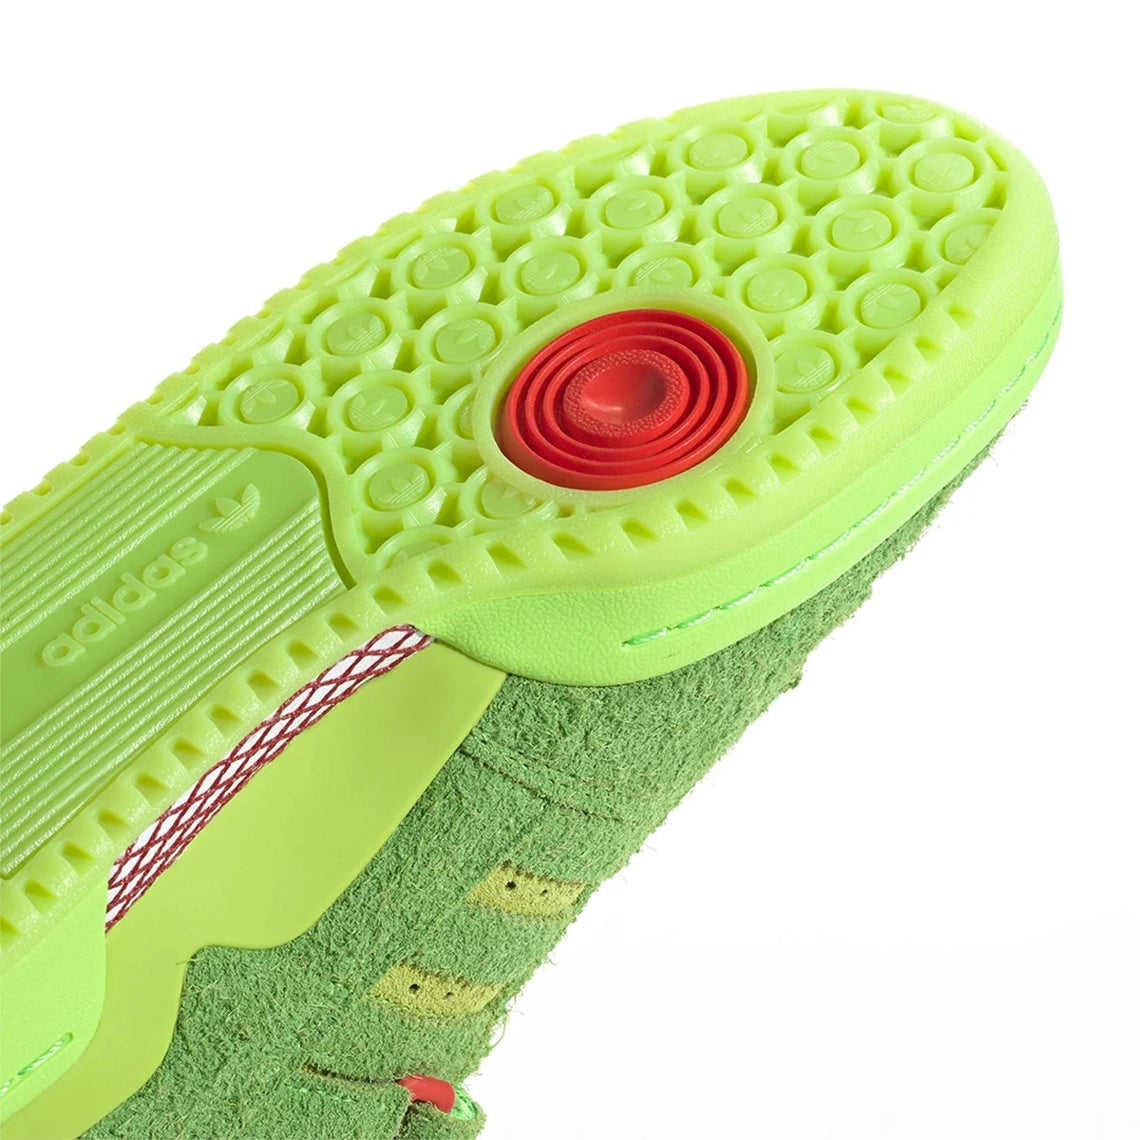 Adidas  Forum Low The Grinch